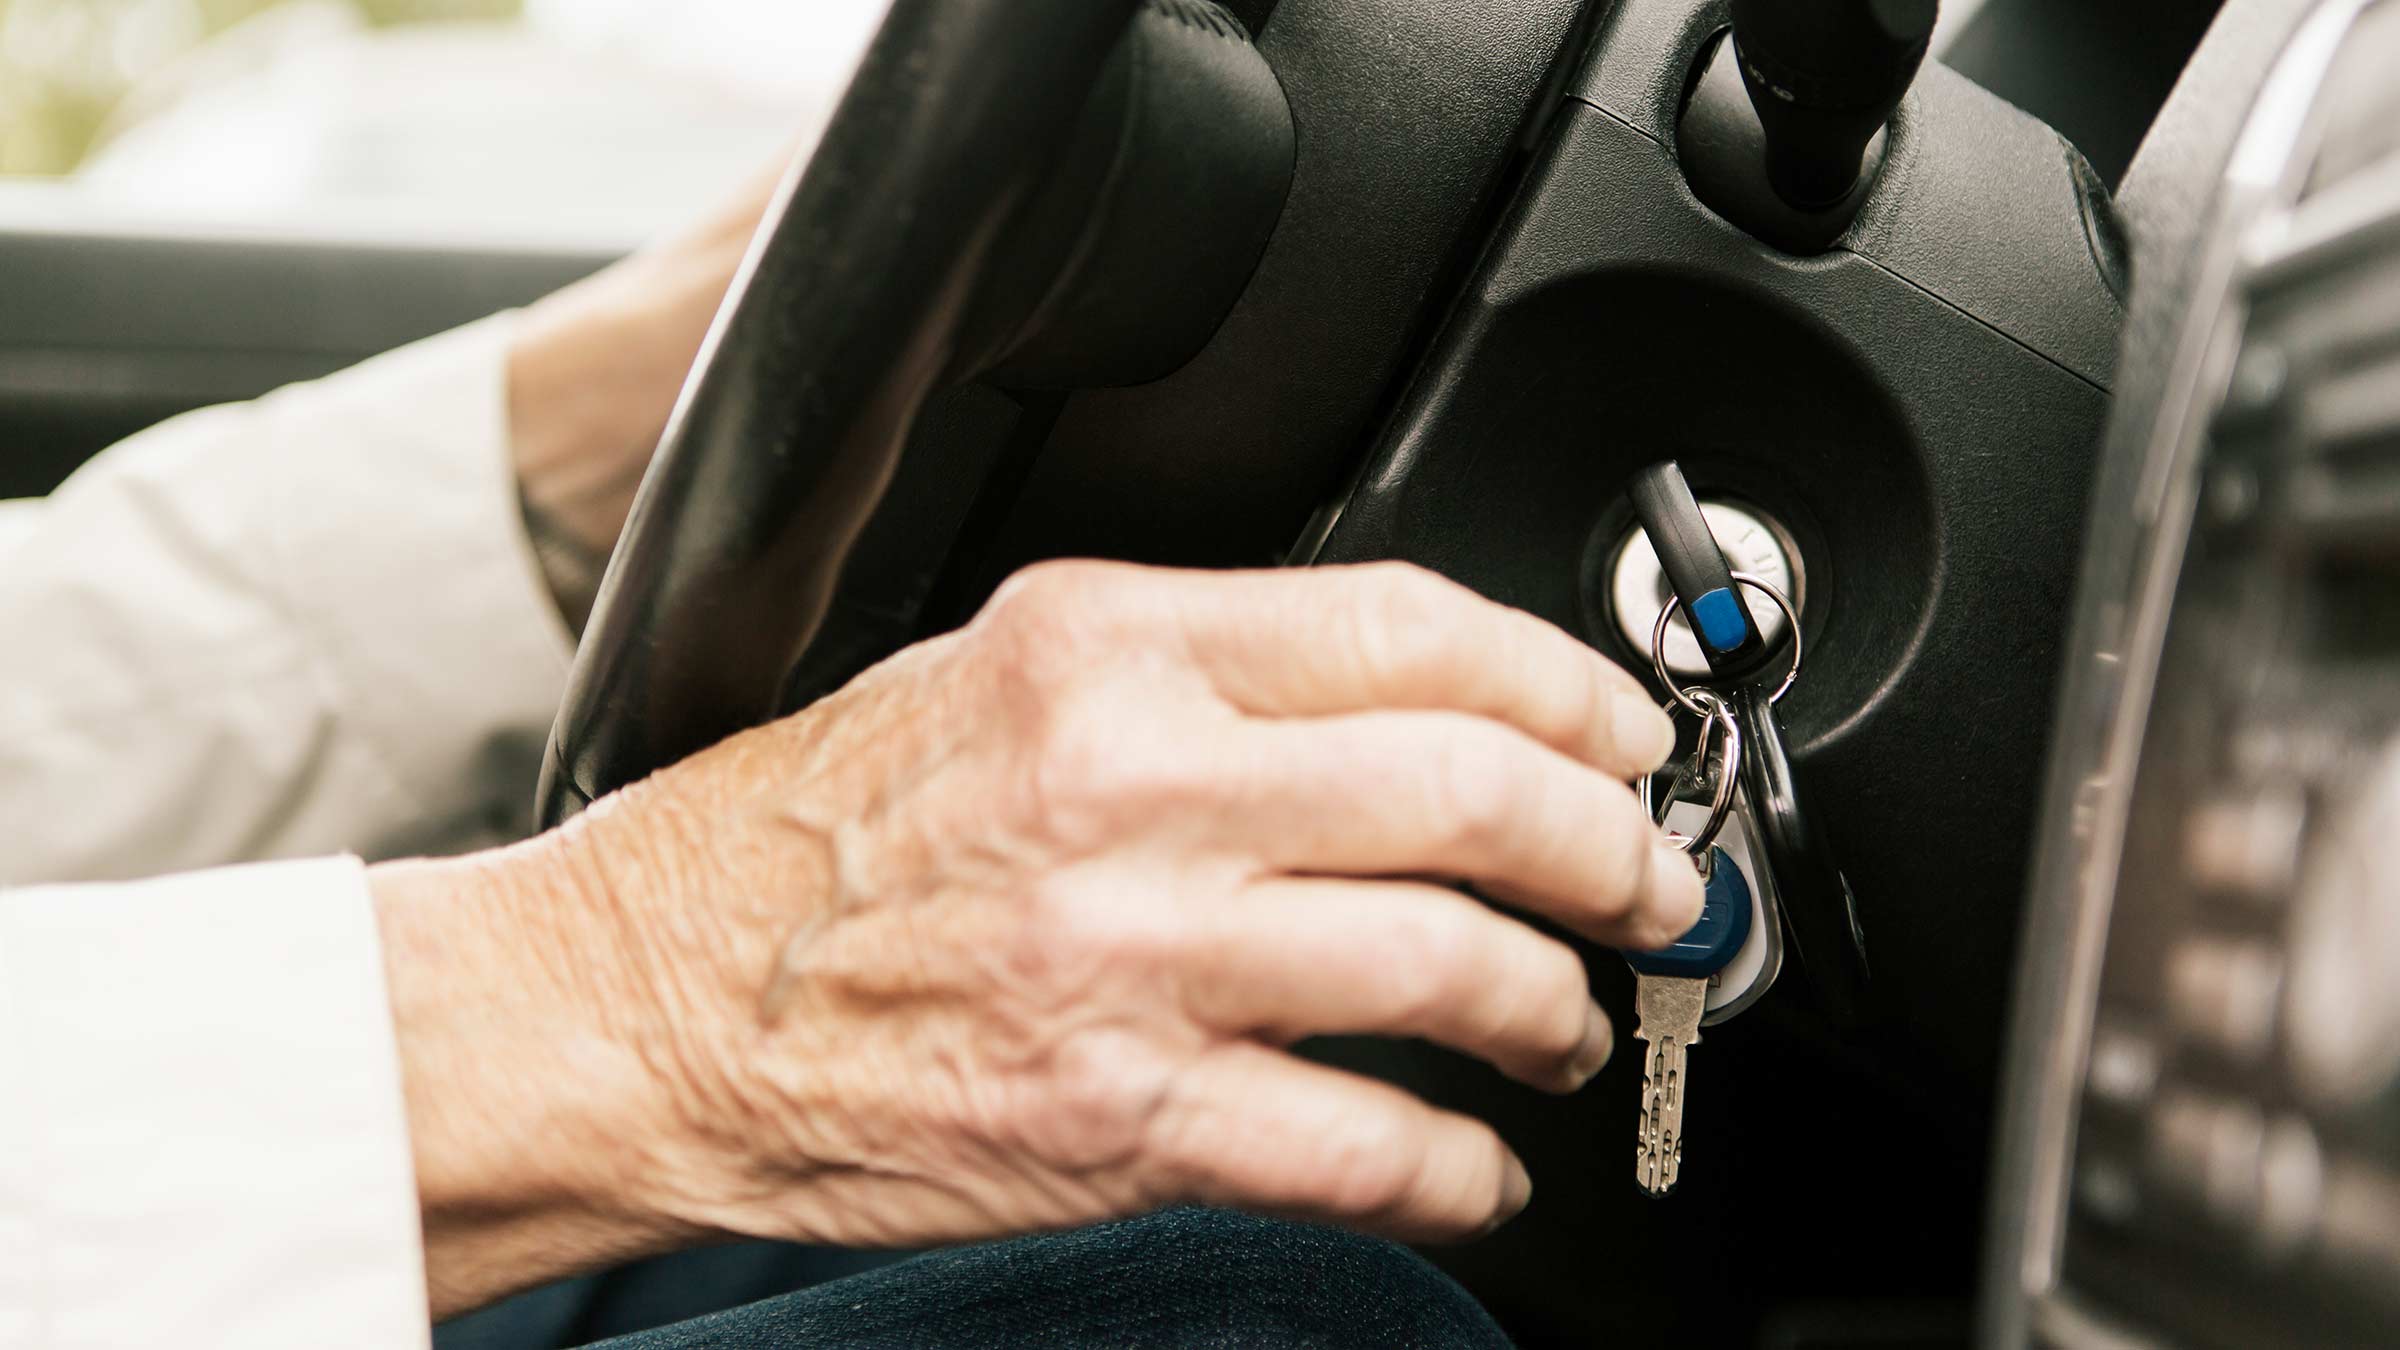 When to take the keys from elderly drivers